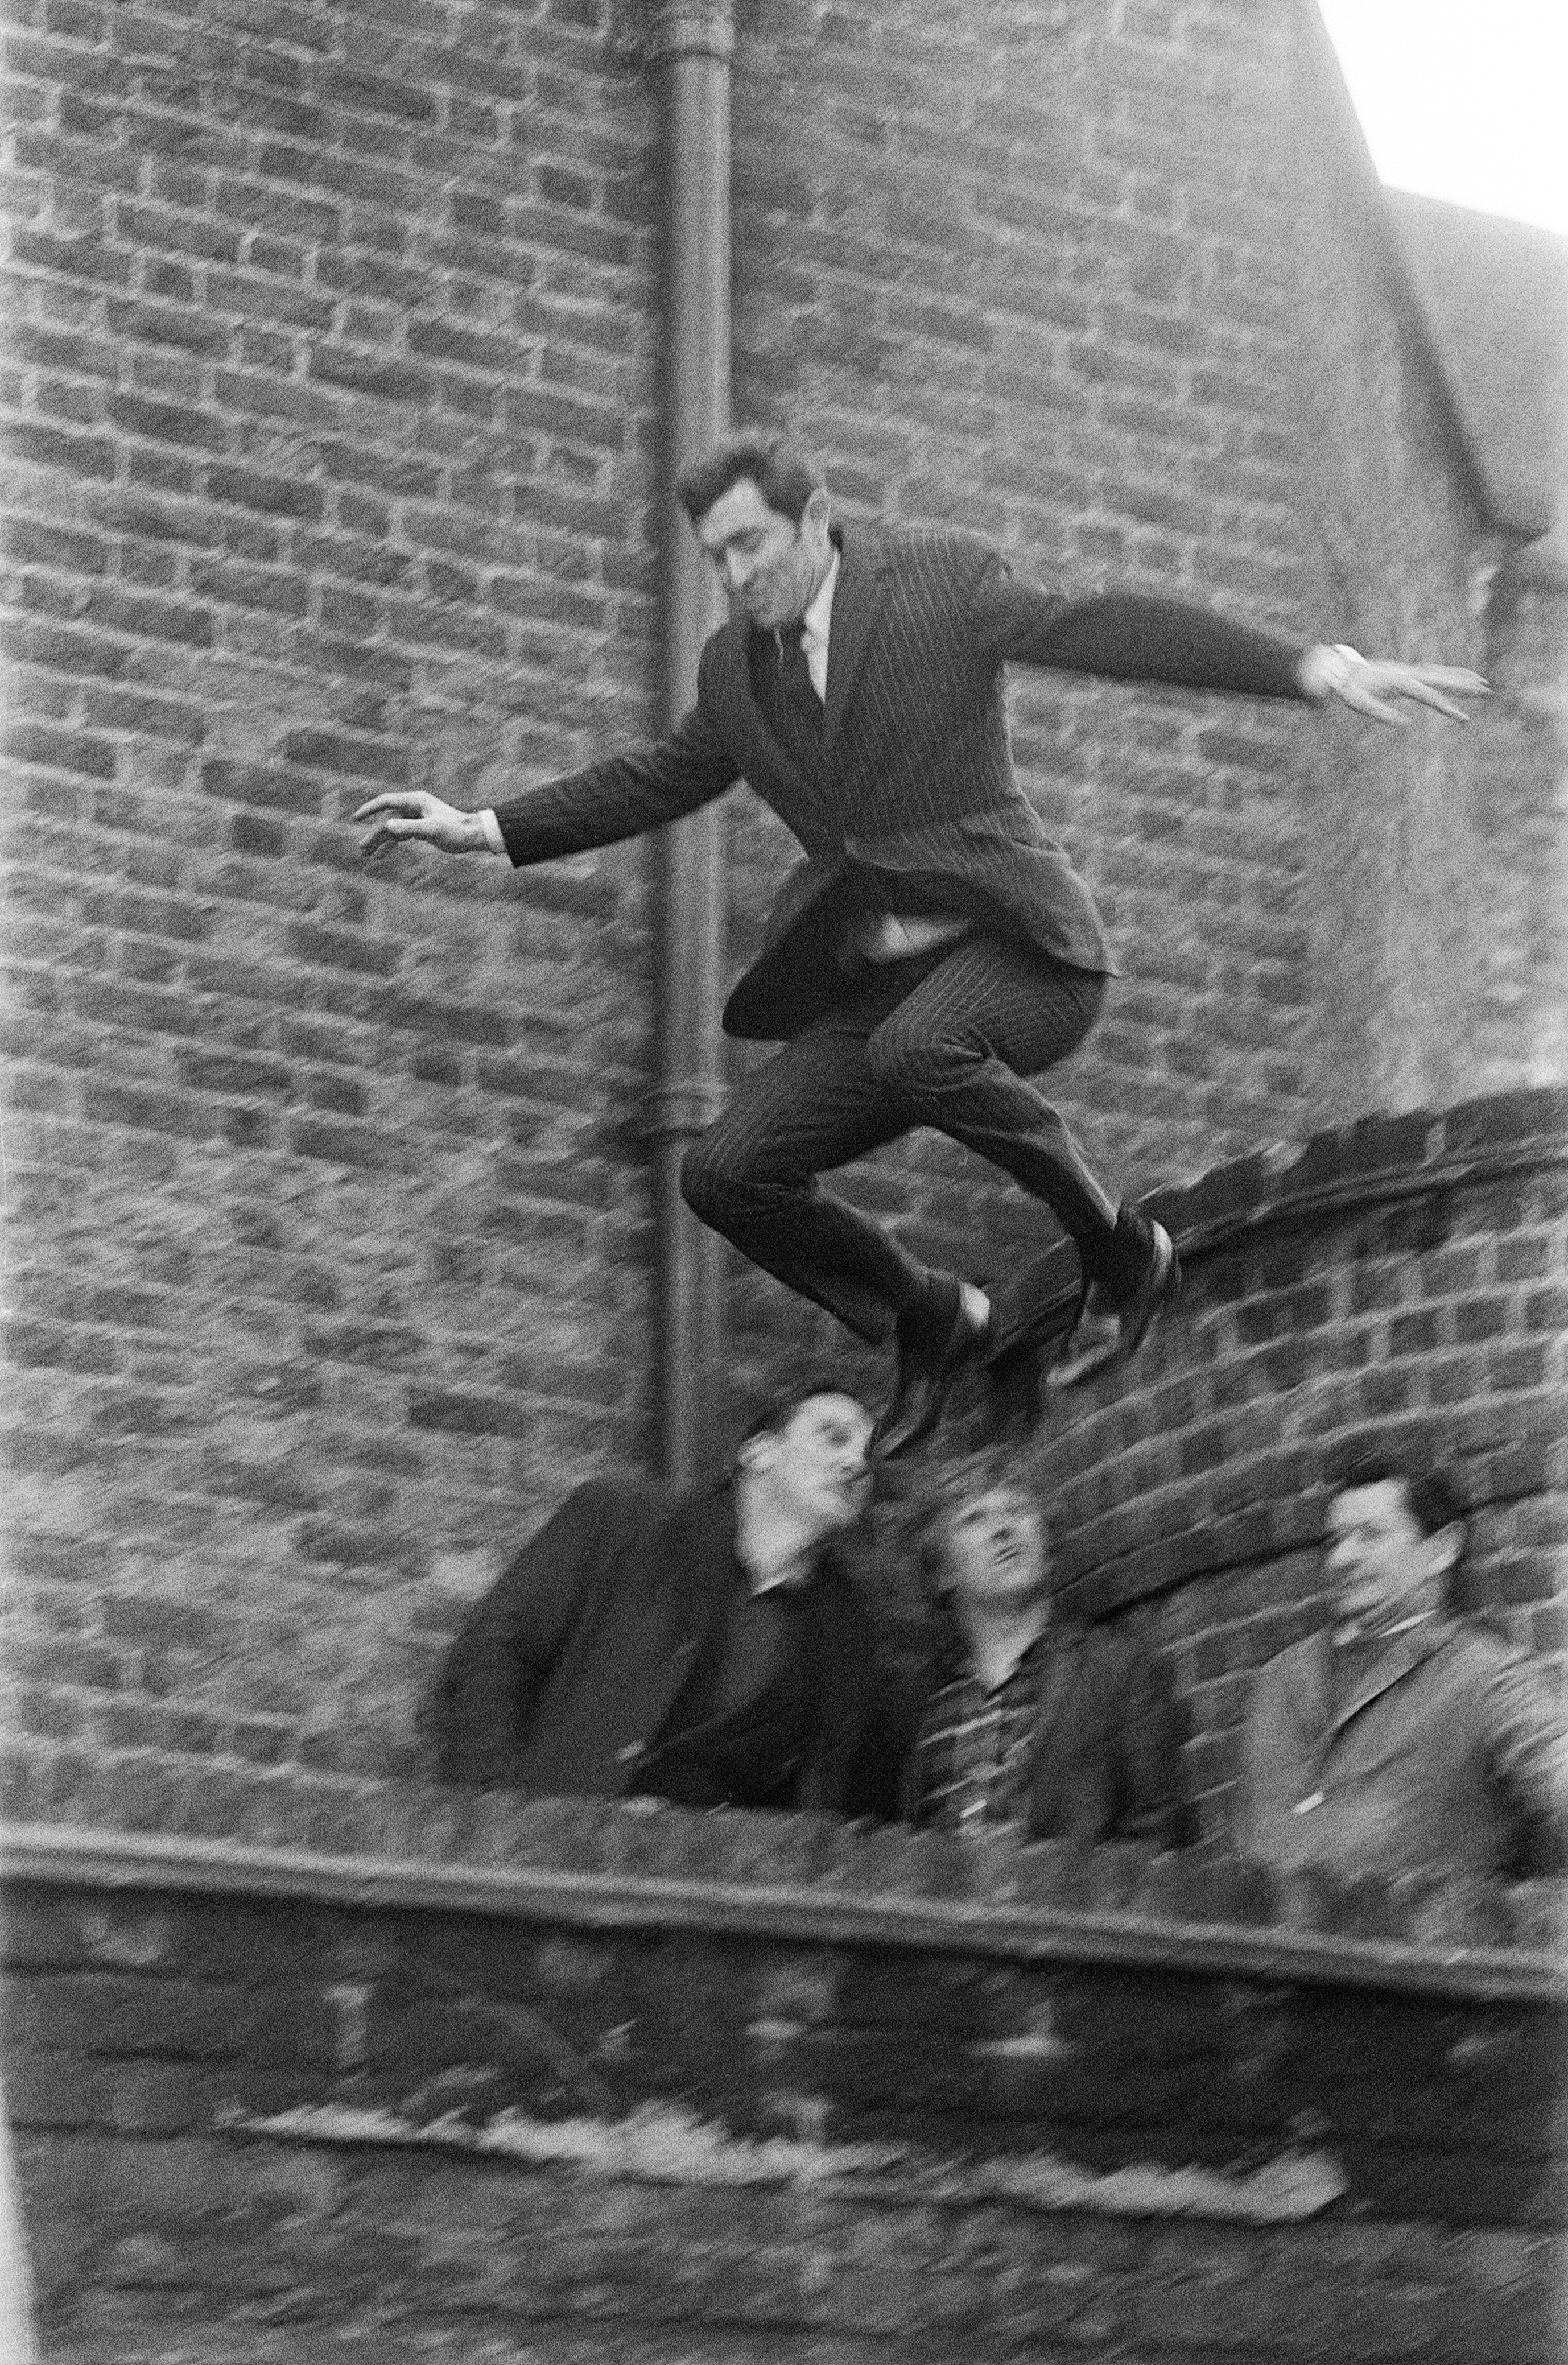 George Lazenby as James Bond in the film "On Her Majesty's Secret Service" in 1969 | Source: Getty Images